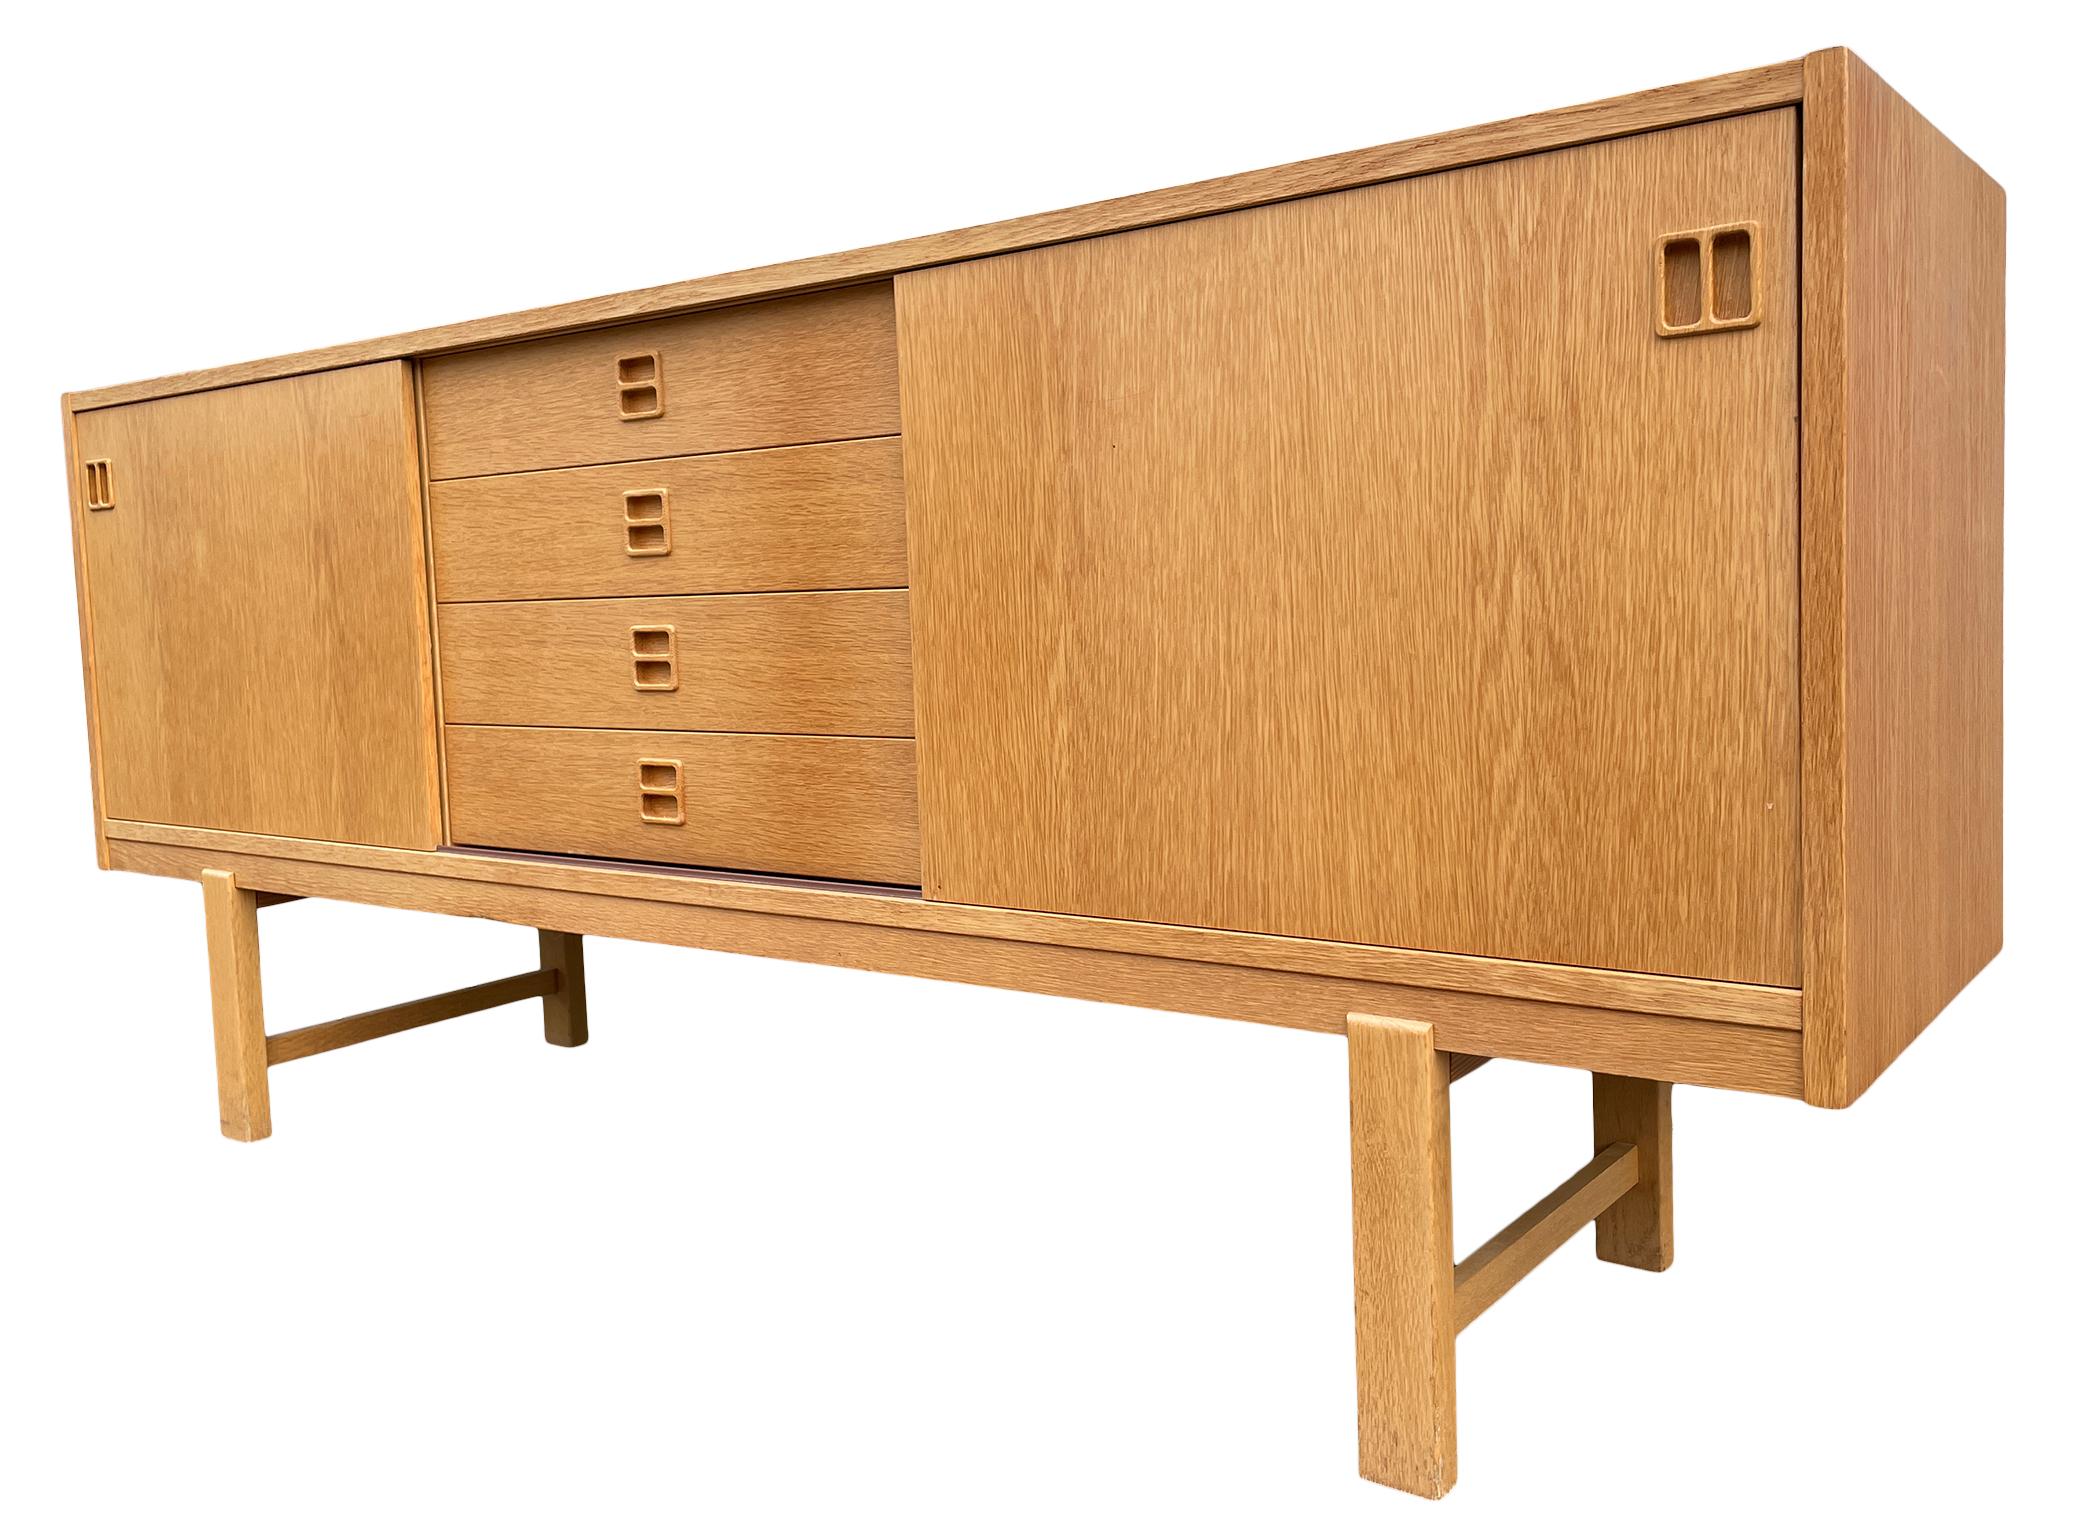 Mid-Century Scandinavian Modern teak low 4 drawer credenza with 2 sliding cabinet doors with an adjustable shelf in each cabinet. Beautiful designed low dresser or credenza - blonde teak wood veneer with sculpted handles. Sits high on a pair of